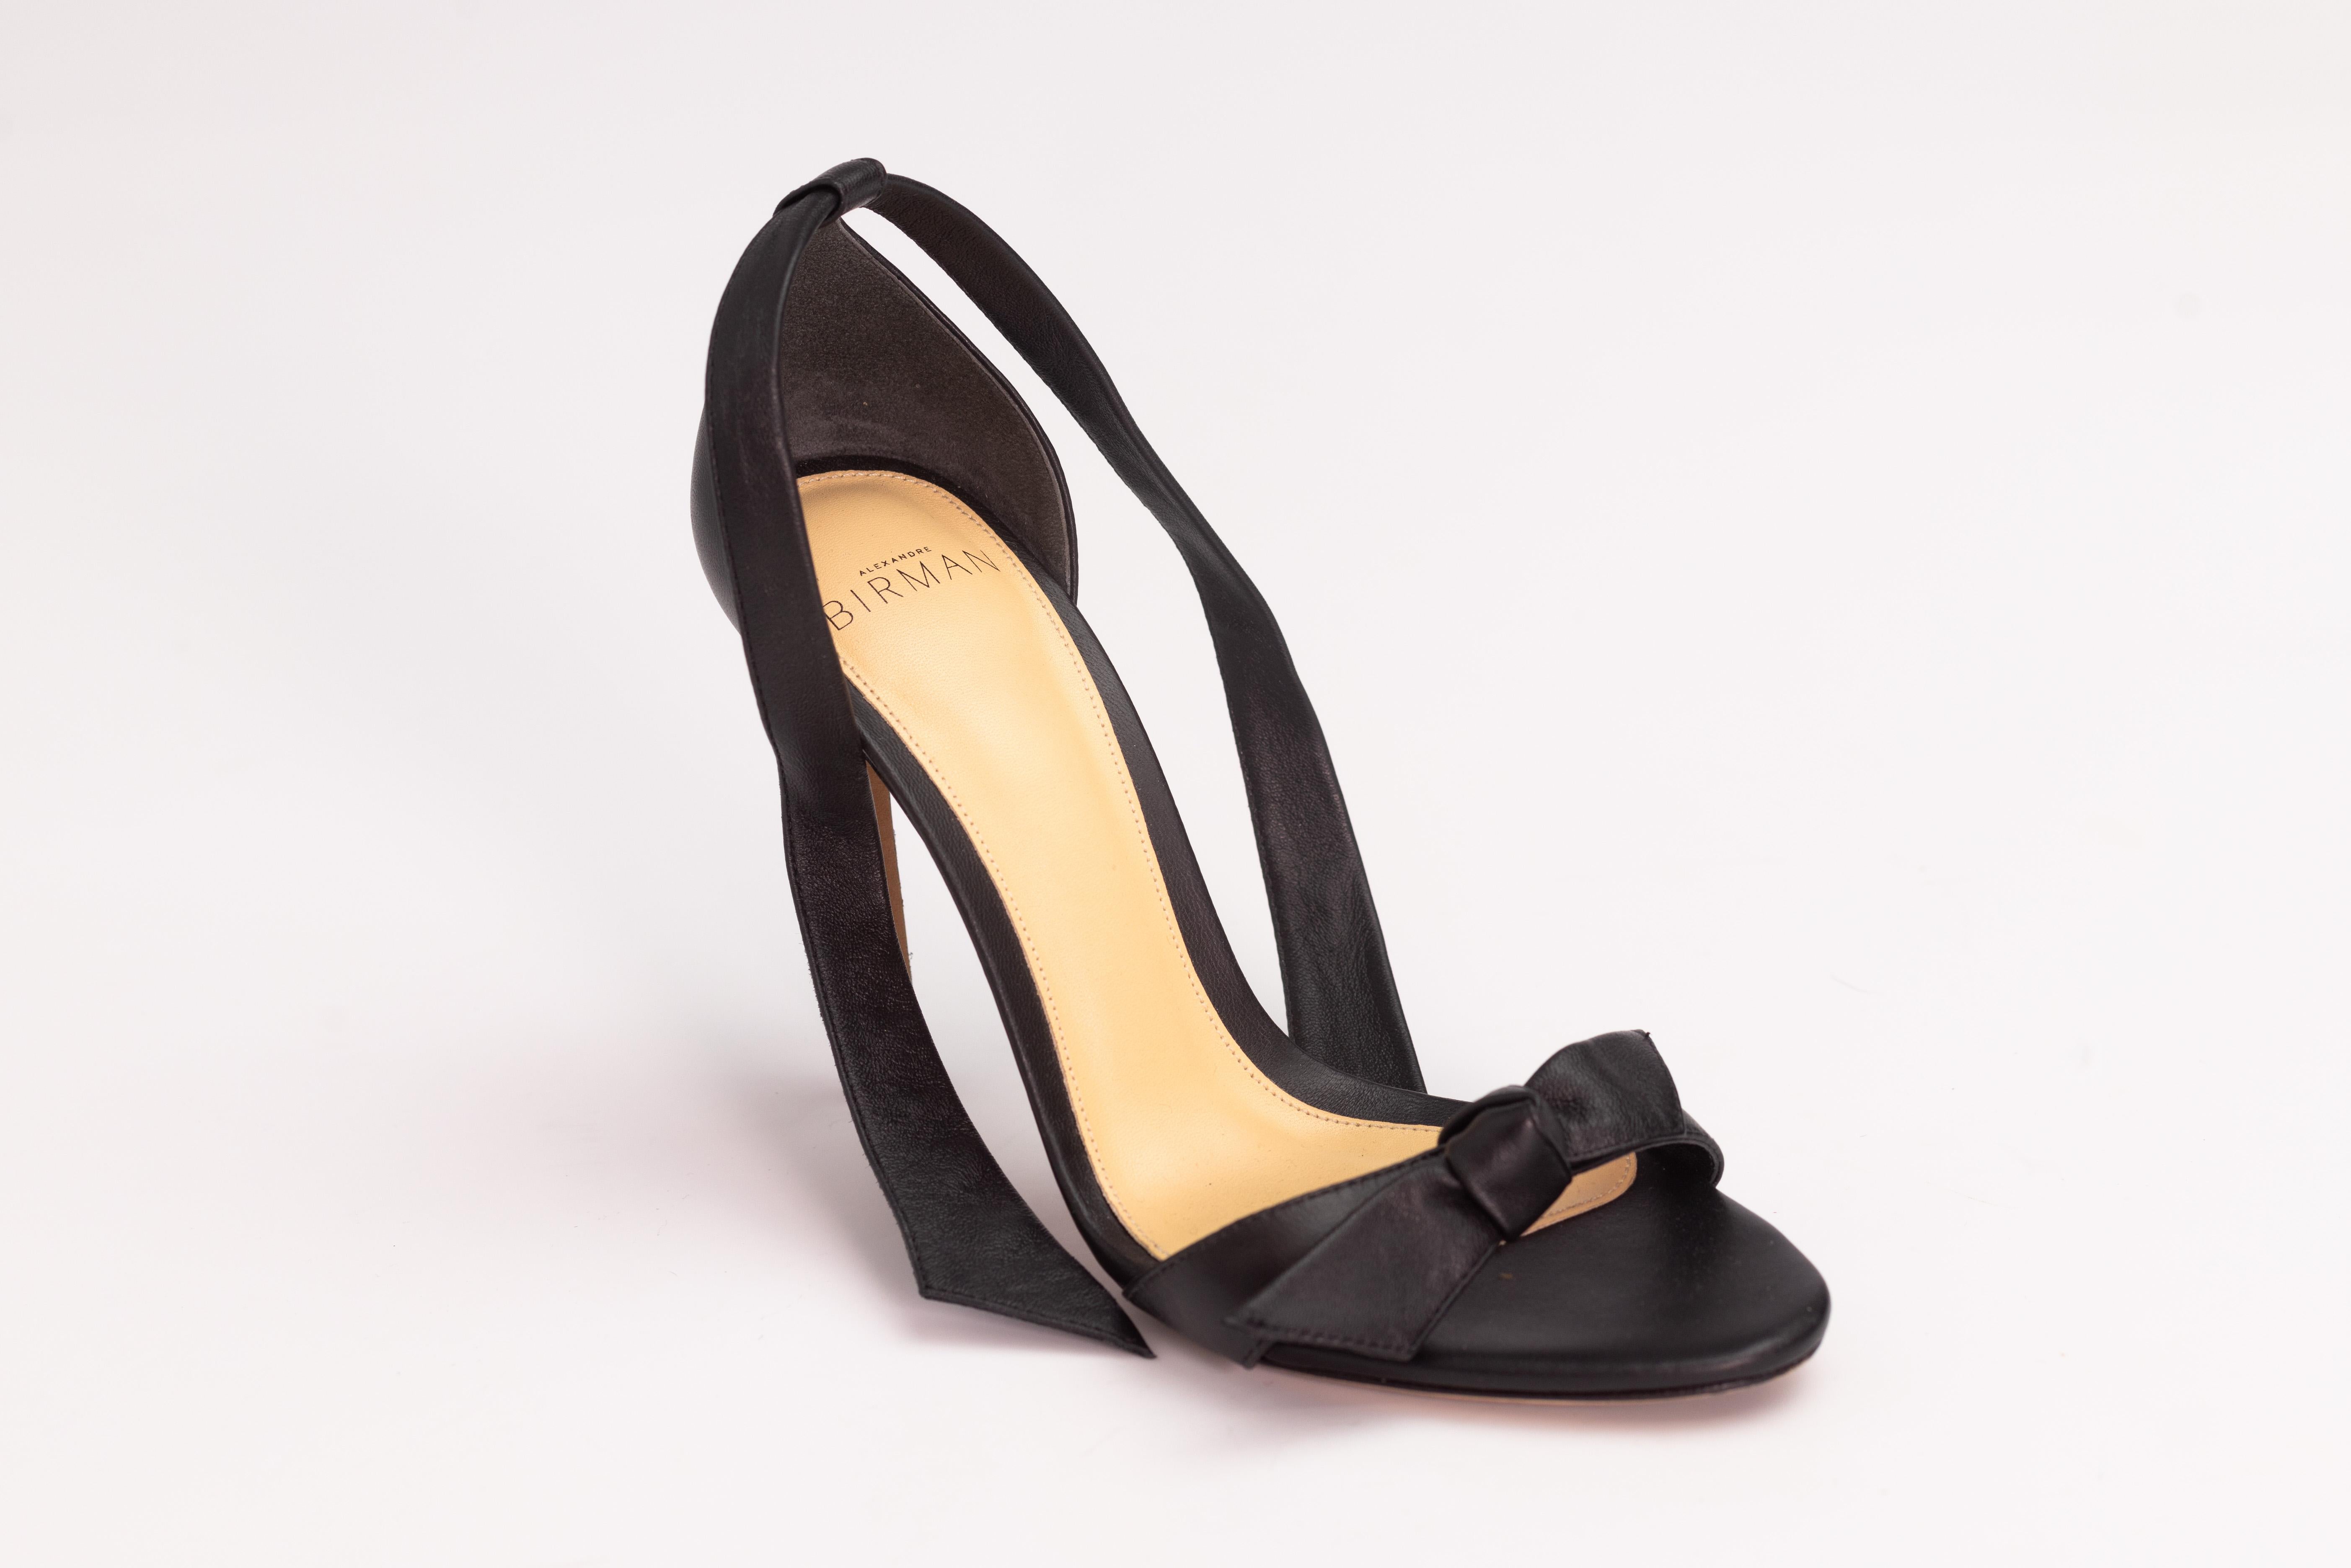 ALEXANDRE BIRMAN OPEN TOE BOW SANDAL HEELS (EU 36)

Color: Black
Material: Leather
Size: 36 EU / 5 US
Heel Height: 100 mm / 4”
Condition: Very good. Stains and marks to the under soles. Faint scratches to uppers.

Made in Italy